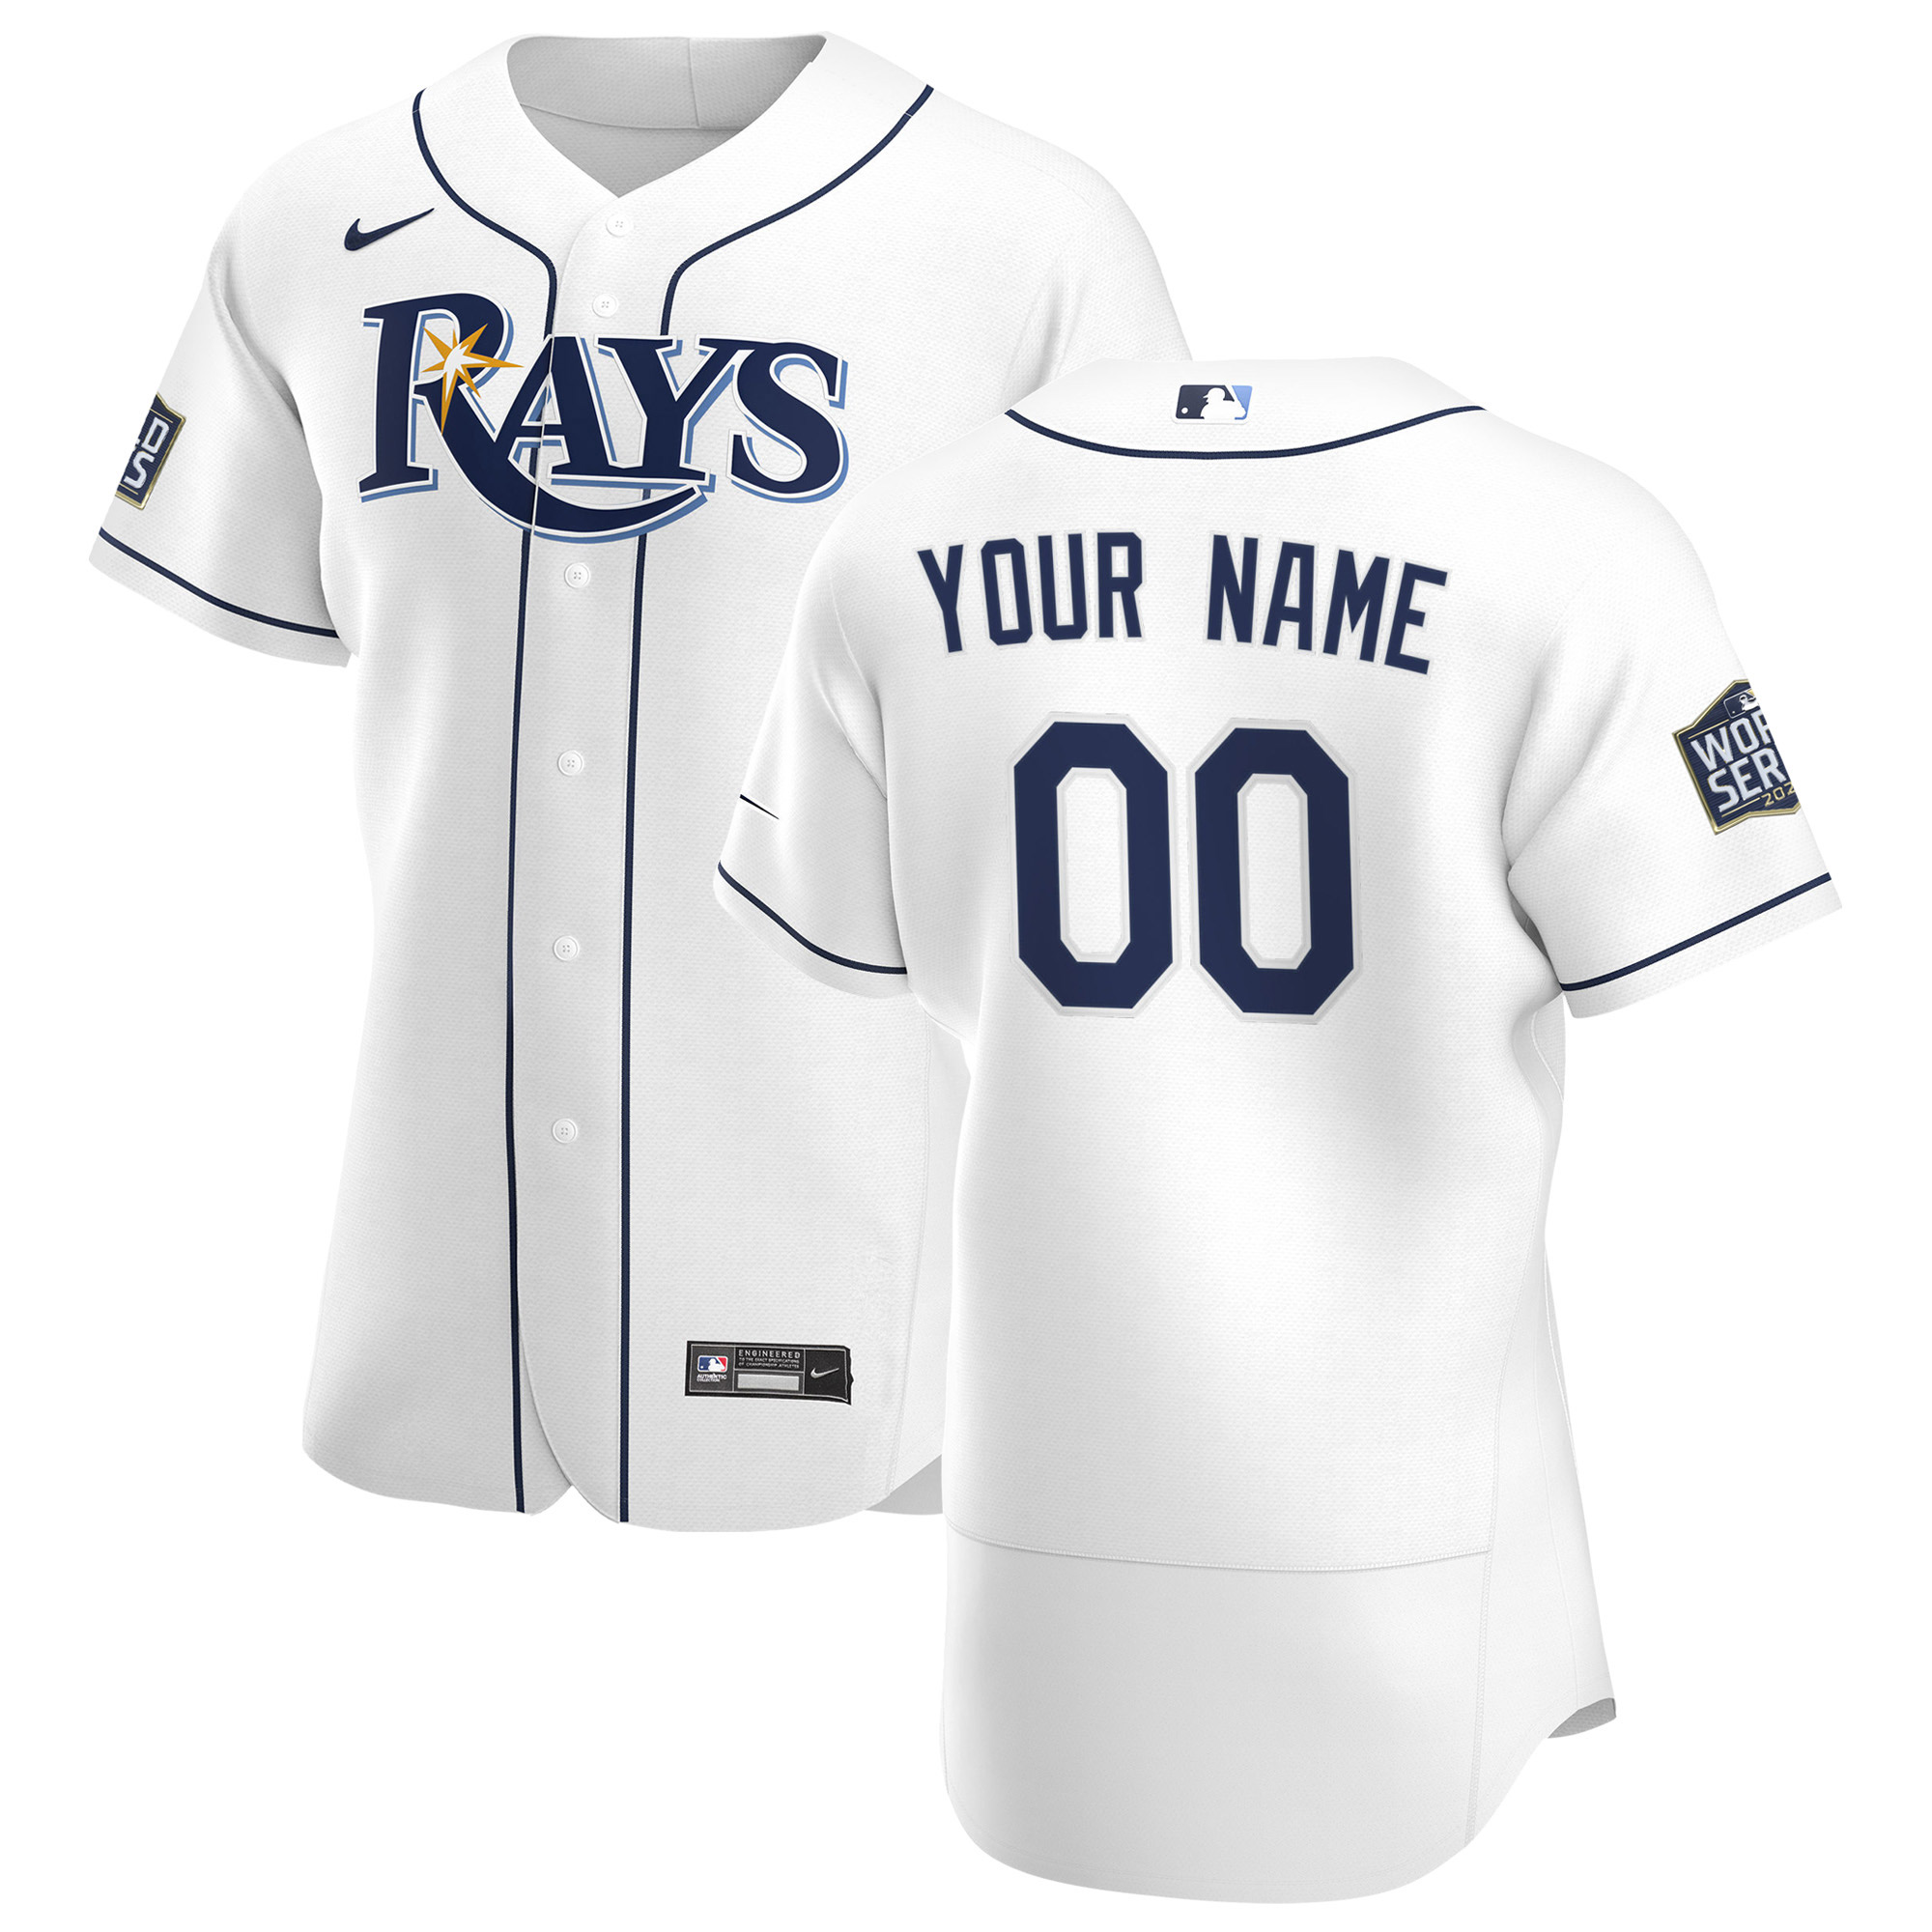 Tampa Bay Rays Nike Official Replica Home Jersey - Mens